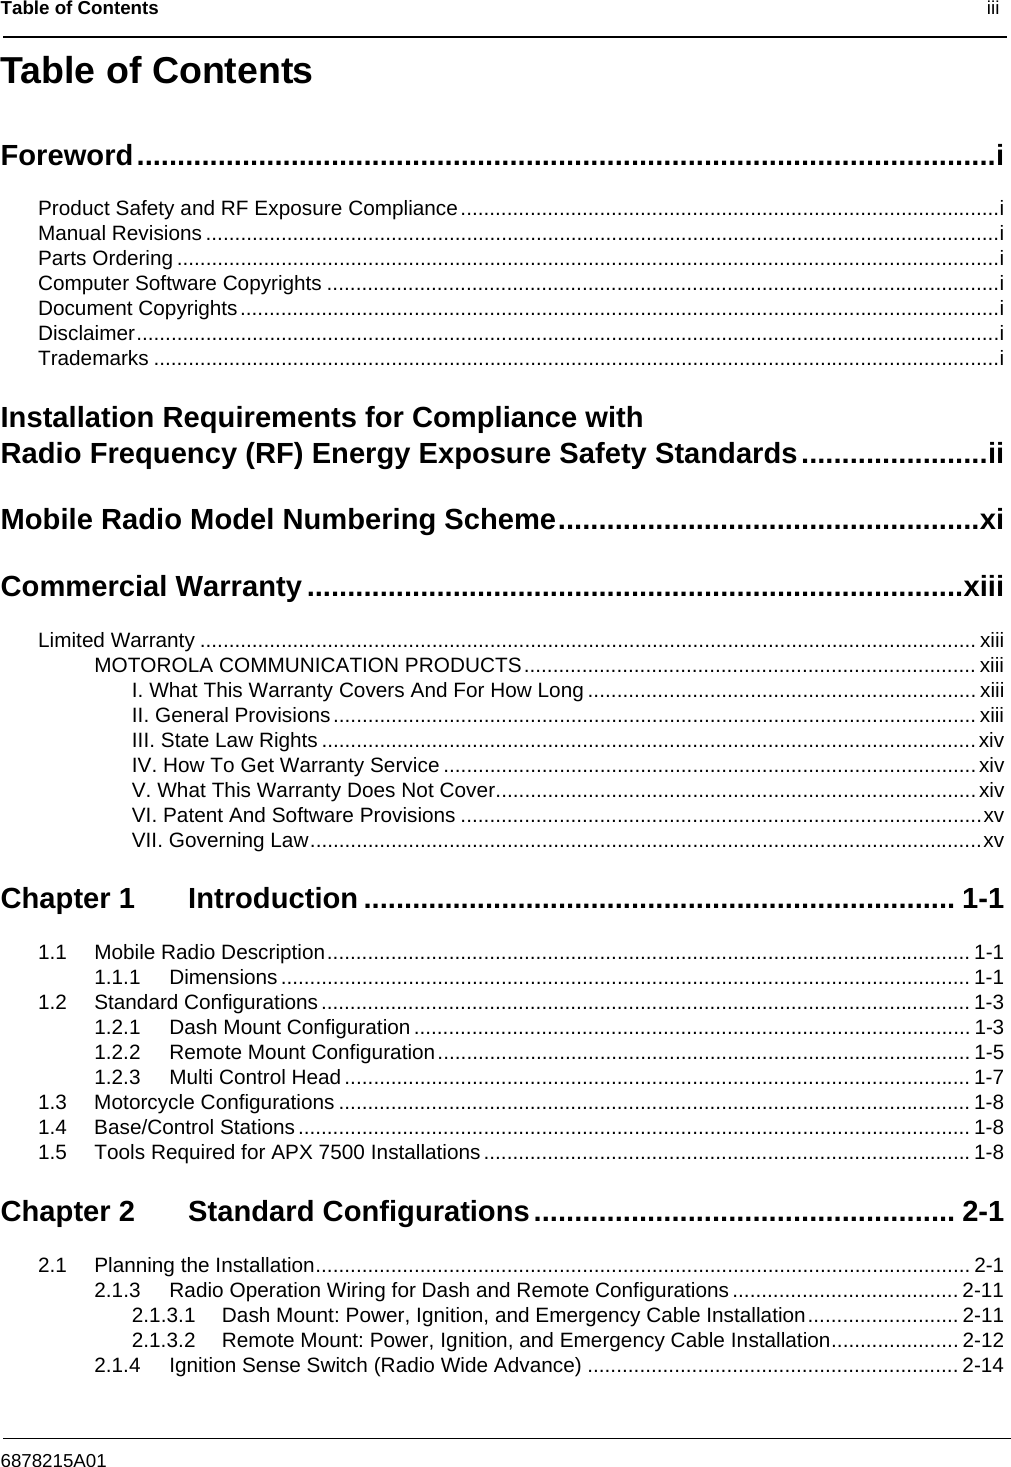 Table of Contents                                                                                              iii6878215A01Table of ContentsForeword..........................................................................................................iProduct Safety and RF Exposure Compliance.............................................................................................iManual Revisions .........................................................................................................................................iParts Ordering ..............................................................................................................................................iComputer Software Copyrights ....................................................................................................................iDocument Copyrights...................................................................................................................................iDisclaimer.....................................................................................................................................................iTrademarks ..................................................................................................................................................iInstallation Requirements for Compliance with Radio Frequency (RF) Energy Exposure Safety Standards.......................iiMobile Radio Model Numbering Scheme....................................................xiCommercial Warranty.................................................................................xiiiLimited Warranty ...................................................................................................................................... xiiiMOTOROLA COMMUNICATION PRODUCTS.............................................................................. xiiiI. What This Warranty Covers And For How Long ................................................................... xiiiII. General Provisions............................................................................................................... xiiiIII. State Law Rights .................................................................................................................xivIV. How To Get Warranty Service ............................................................................................xivV. What This Warranty Does Not Cover...................................................................................xivVI. Patent And Software Provisions ..........................................................................................xvVII. Governing Law....................................................................................................................xvChapter 1 Introduction ......................................................................... 1-11.1 Mobile Radio Description............................................................................................................... 1-11.1.1 Dimensions ....................................................................................................................... 1-11.2 Standard Configurations ................................................................................................................ 1-31.2.1 Dash Mount Configuration ................................................................................................ 1-31.2.2 Remote Mount Configuration............................................................................................ 1-51.2.3 Multi Control Head ............................................................................................................ 1-71.3 Motorcycle Configurations ............................................................................................................. 1-81.4 Base/Control Stations .................................................................................................................... 1-81.5 Tools Required for APX 7500 Installations ....................................................................................1-8Chapter 2 Standard Configurations.................................................... 2-12.1 Planning the Installation................................................................................................................. 2-12.1.3 Radio Operation Wiring for Dash and Remote Configurations ....................................... 2-112.1.3.1 Dash Mount: Power, Ignition, and Emergency Cable Installation.......................... 2-112.1.3.2 Remote Mount: Power, Ignition, and Emergency Cable Installation...................... 2-122.1.4 Ignition Sense Switch (Radio Wide Advance) ................................................................ 2-14